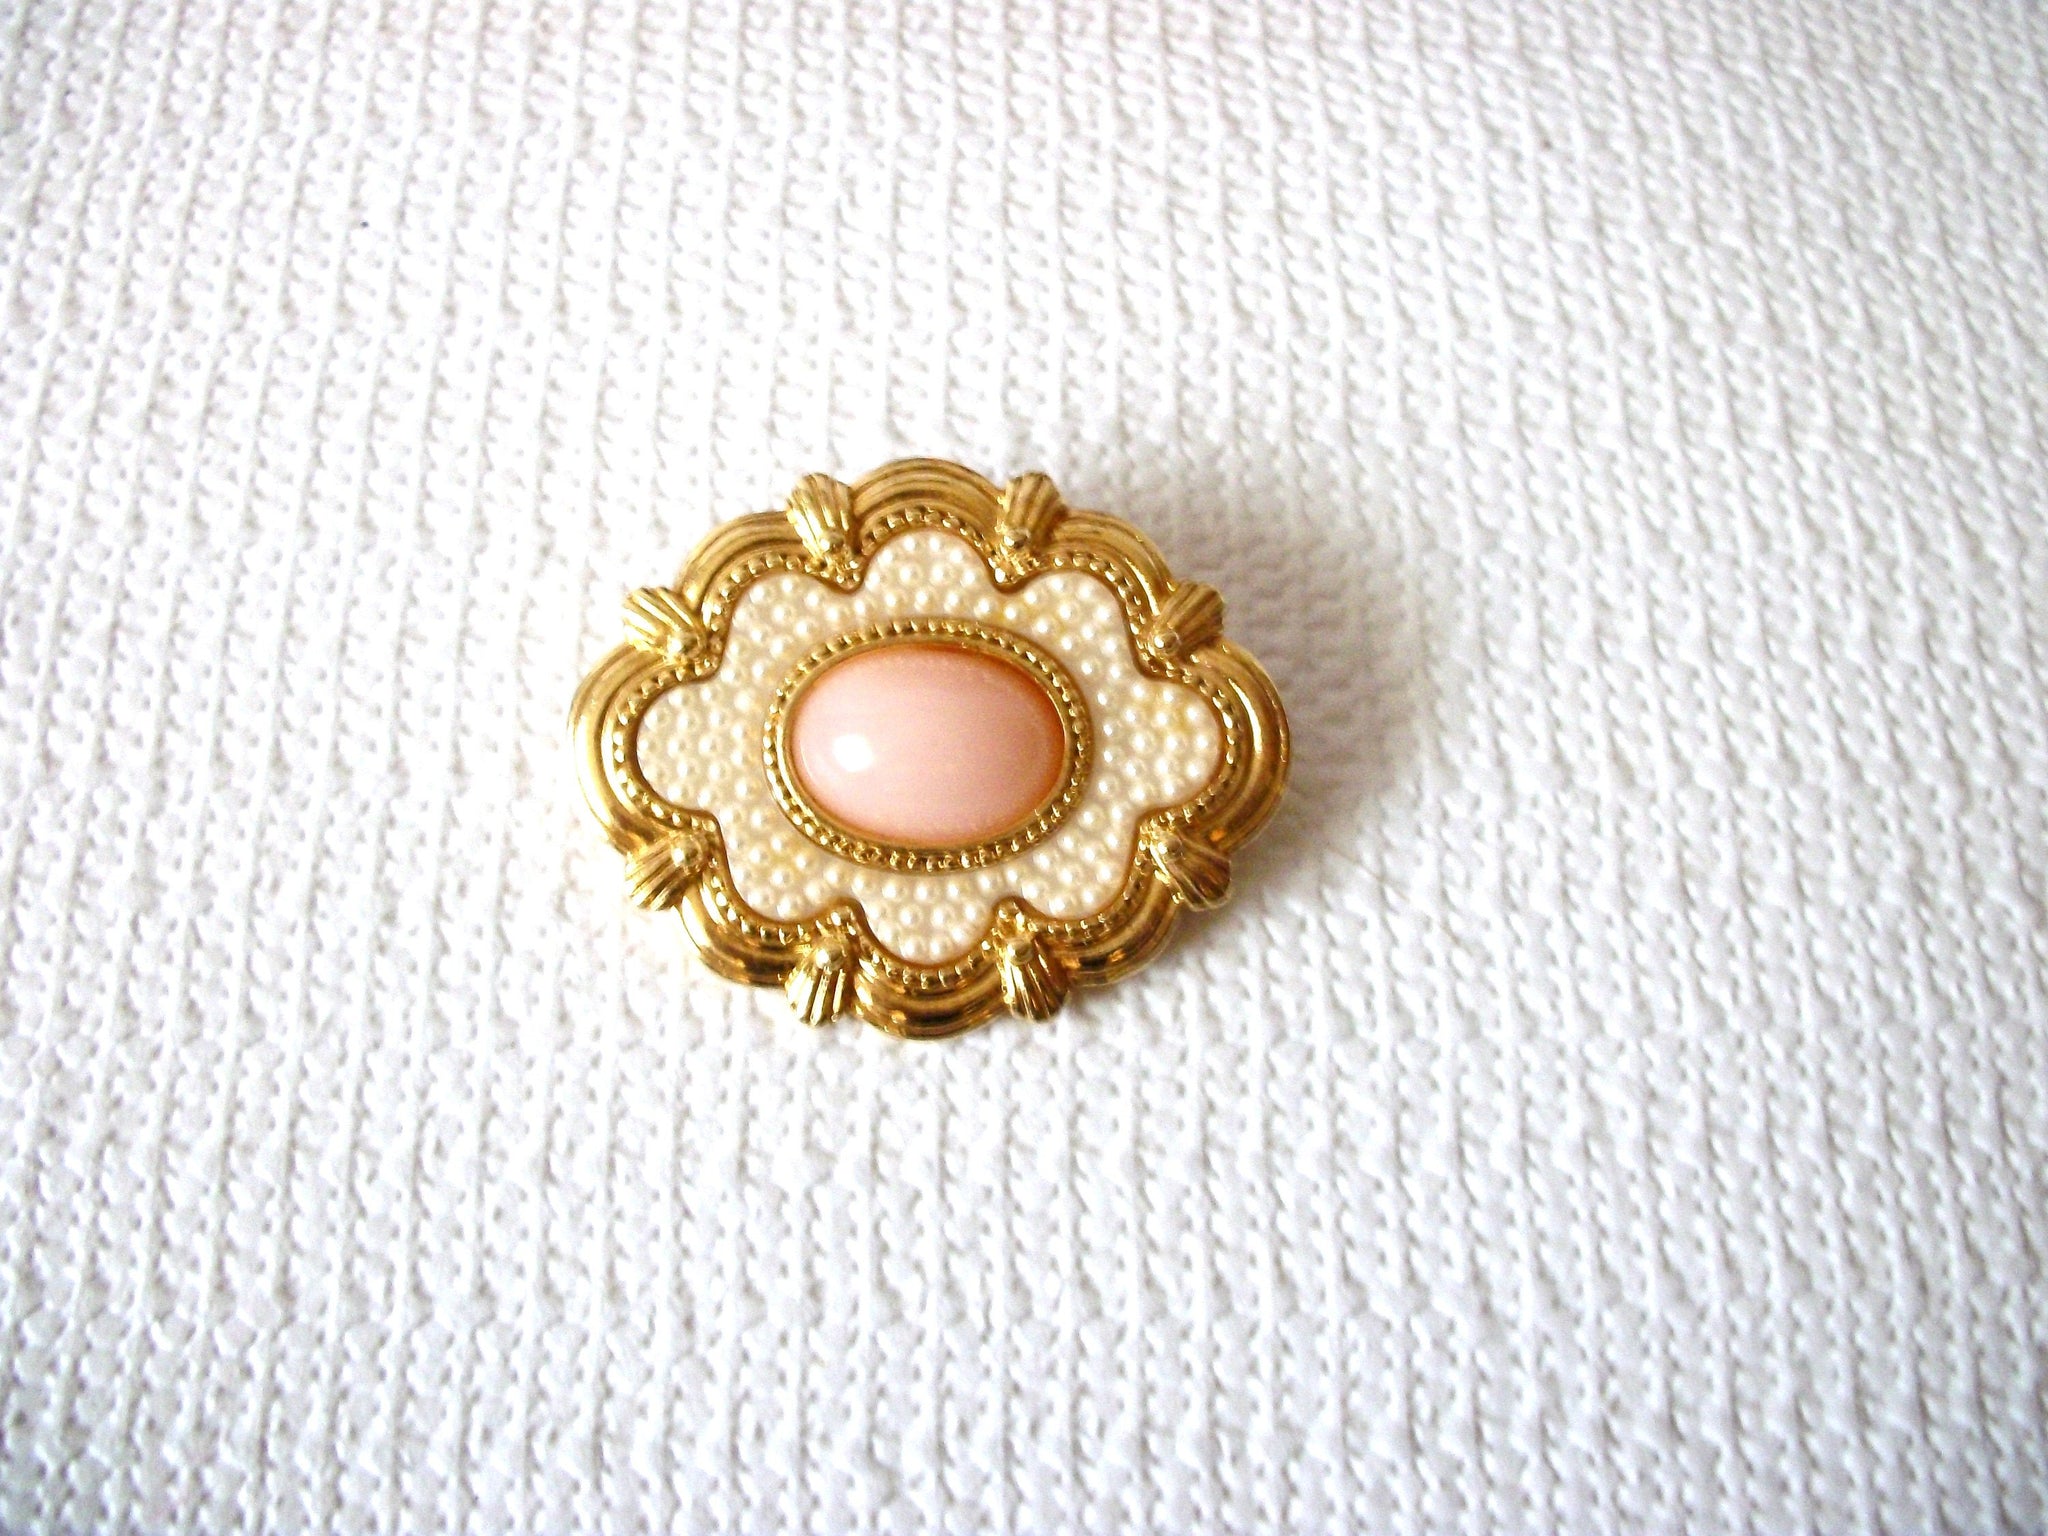 Vintage Victorian Pink Pearl Ornate Pin 71218T